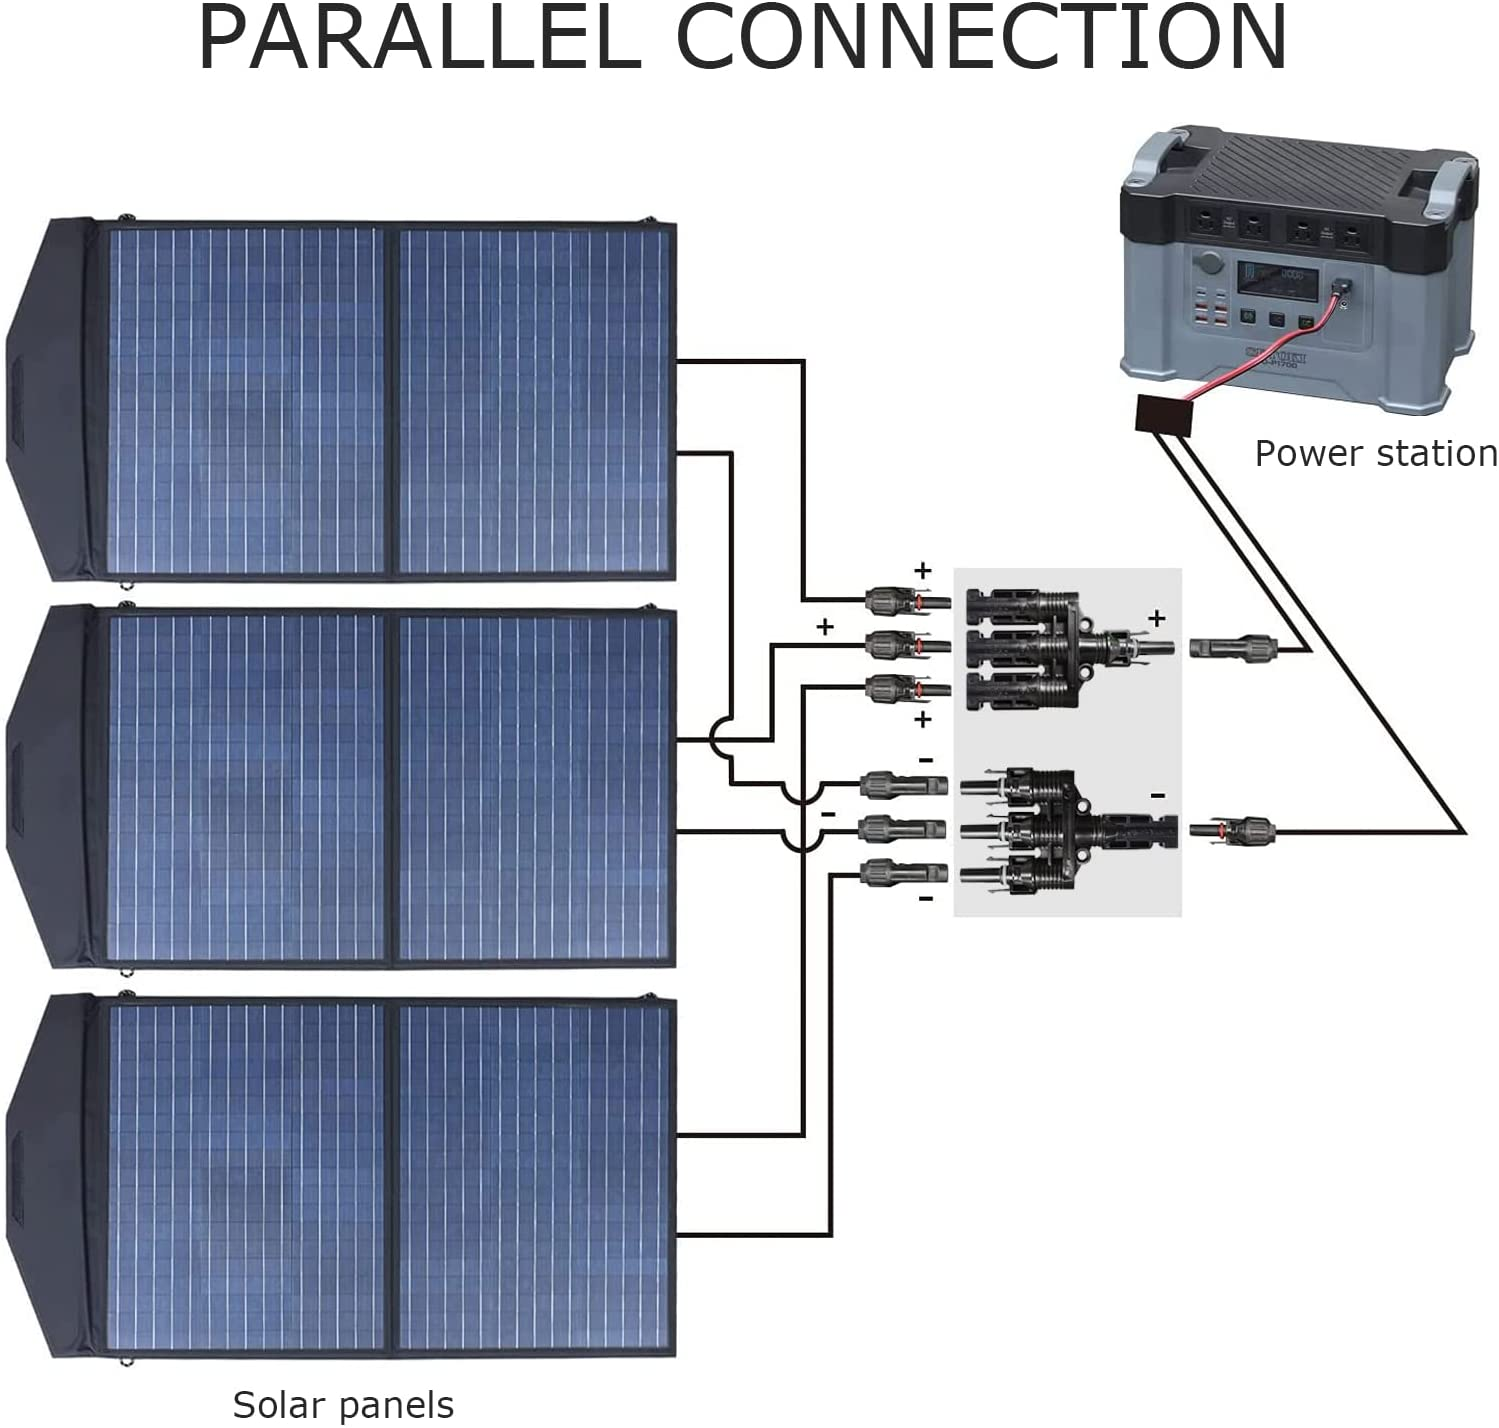 ALLPOWERS Solar Panel T Branch Connectors Solar Panel Parallel Connectors 1 to 3 Solar Connectors Plug Tool Kit